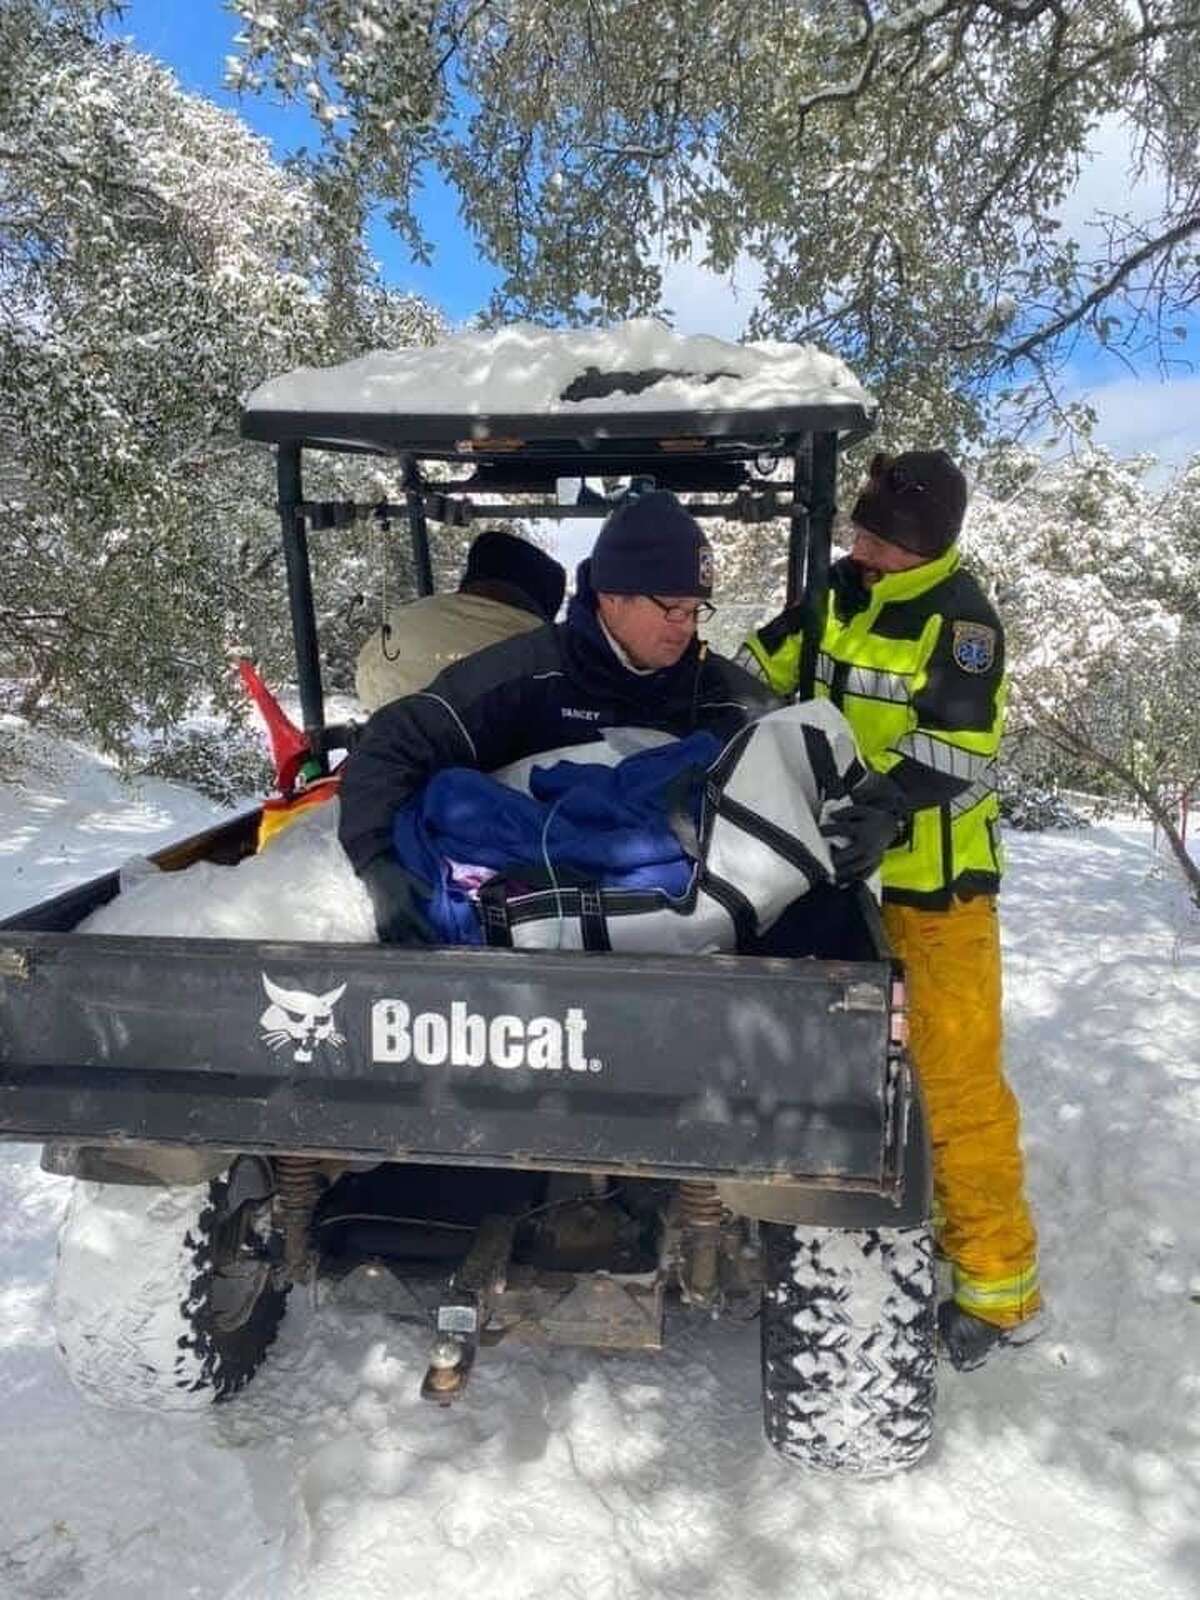 With an ambulance stuck in the snow, Austin paramedics had to resort to warming a 98-year-old patient in a utility vehicle.